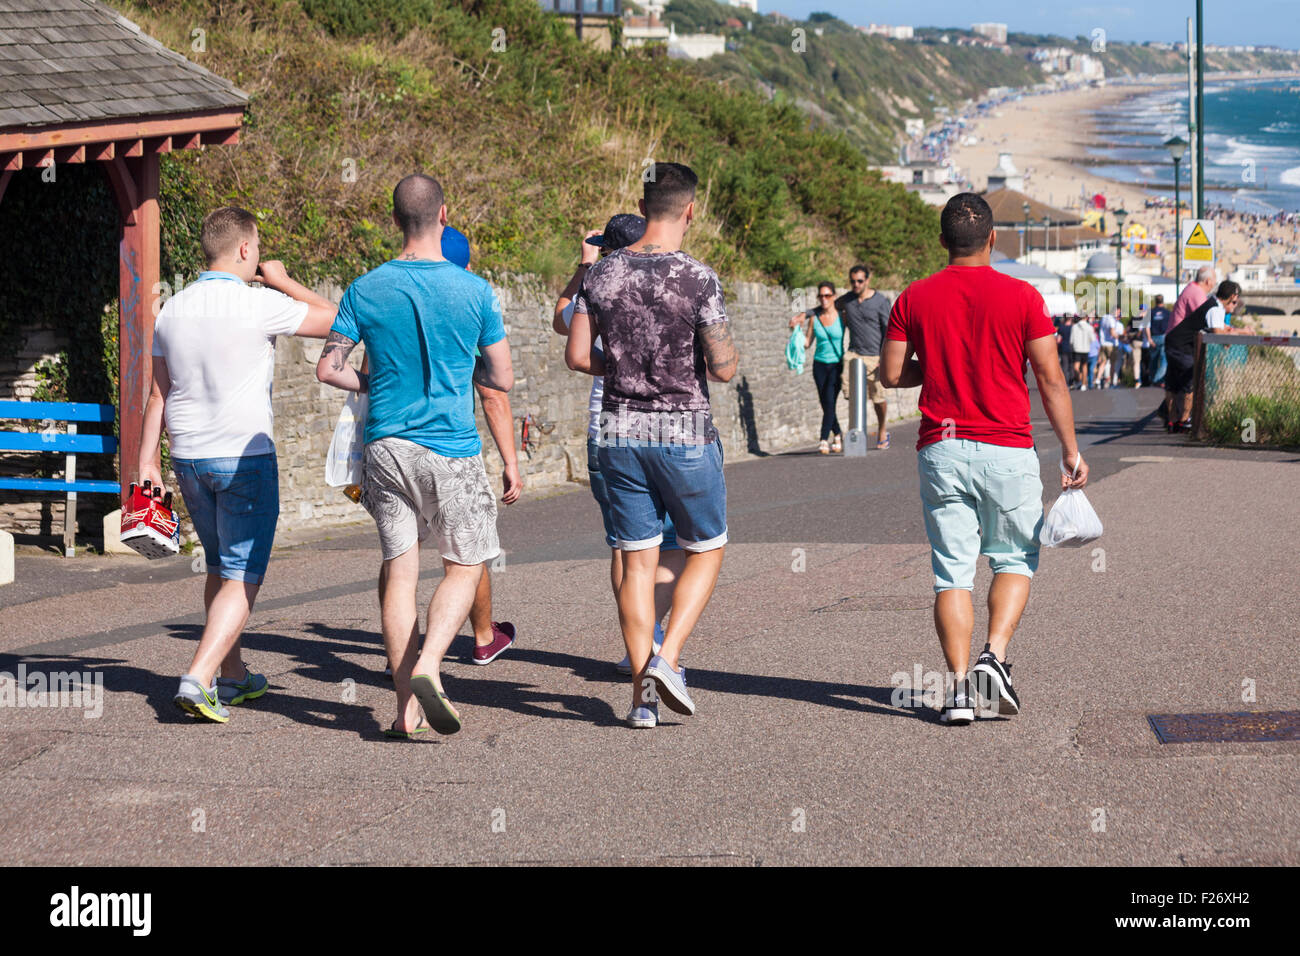 Group of lads in Bournemouth heading for the beach, a popular destination for stag nights/weekends, in September Stock Photo